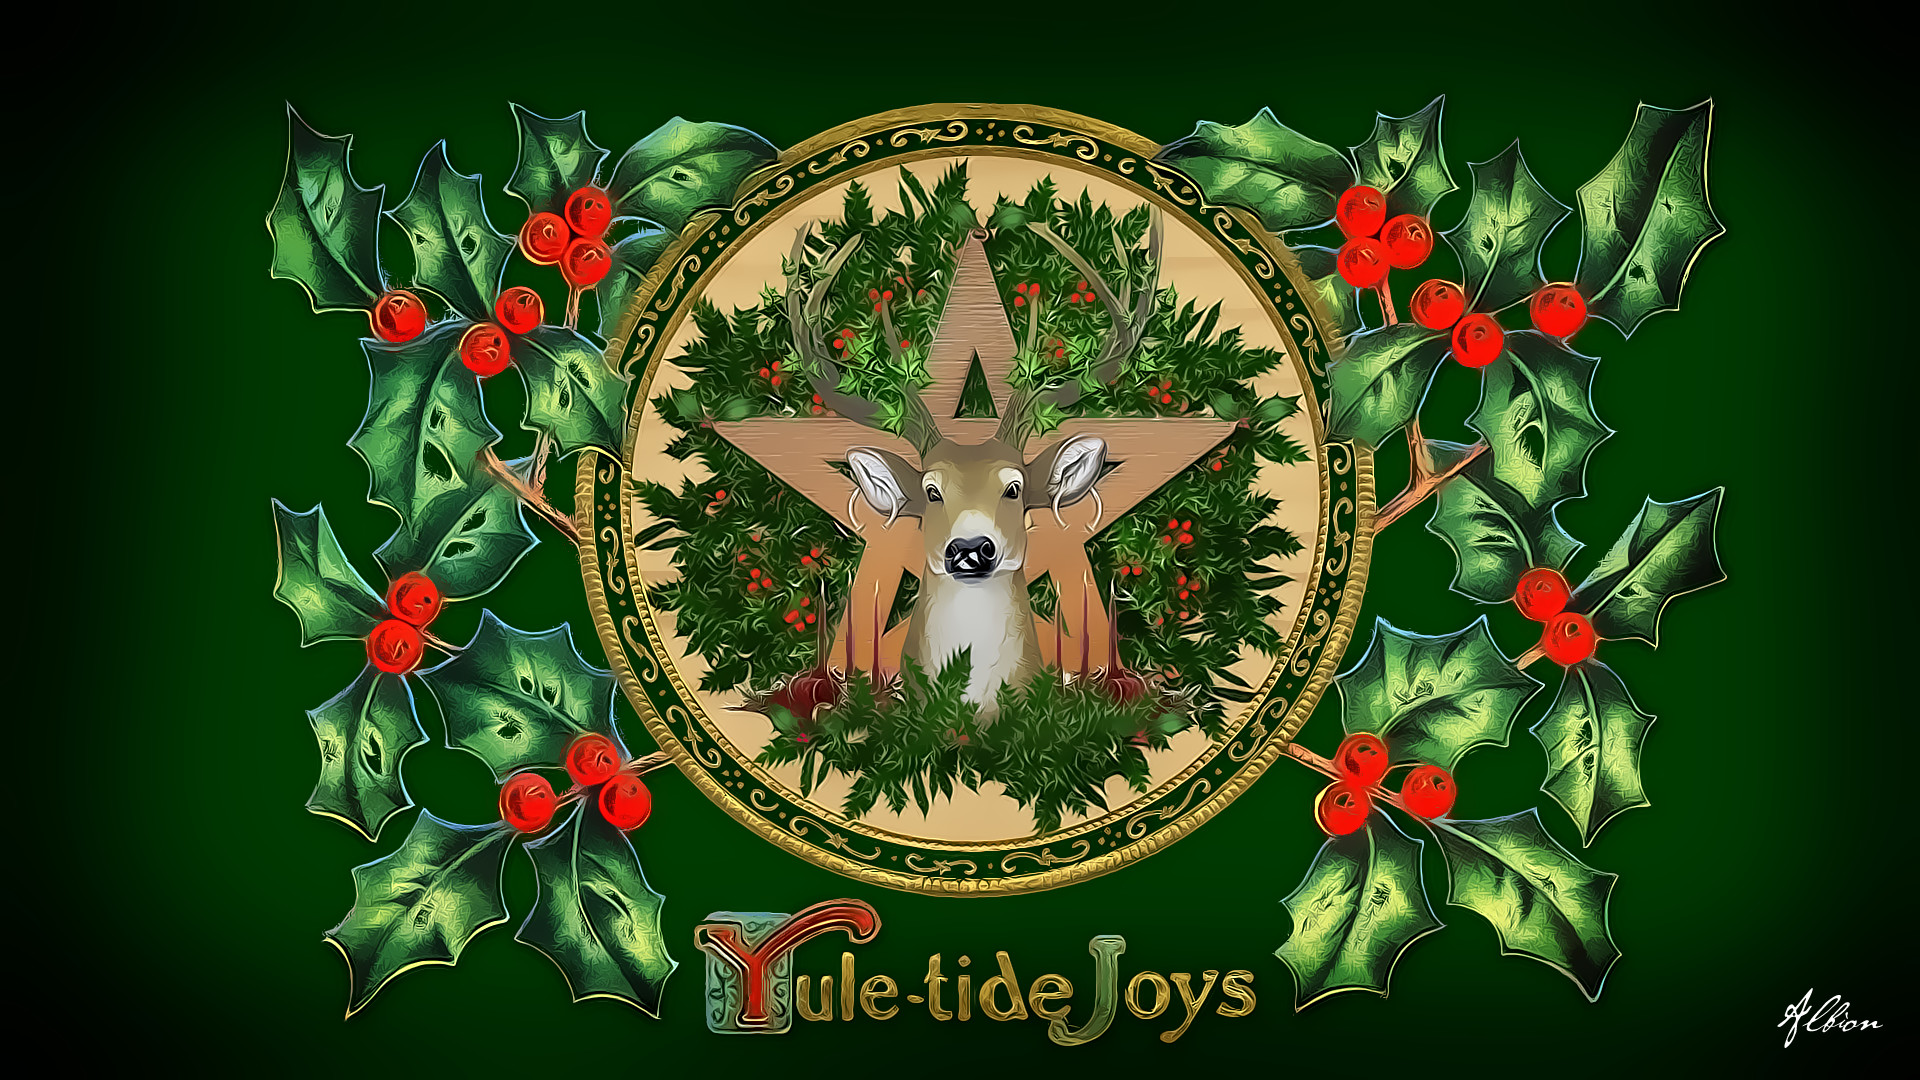 1920x1080 ... Yuletide Greetings from Albion by The-Pagan-Gallery